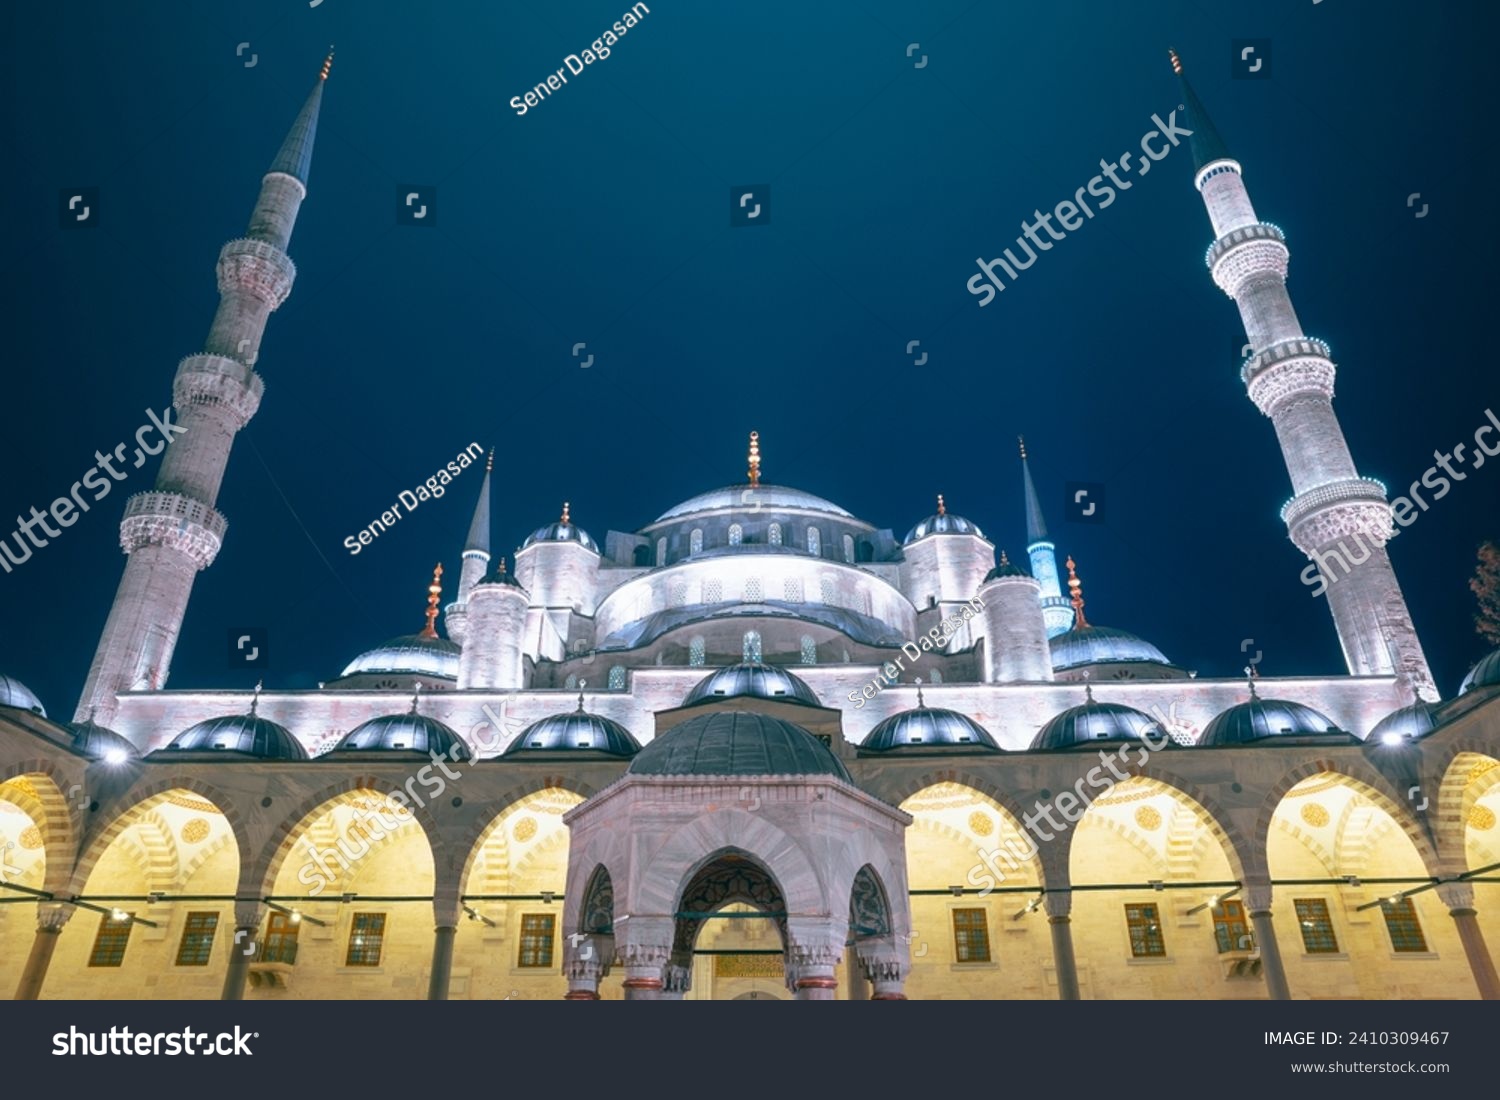 Sultanahmet Camii or Blue Mosque view at night. Ramadan or islamic background photo. #2410309467